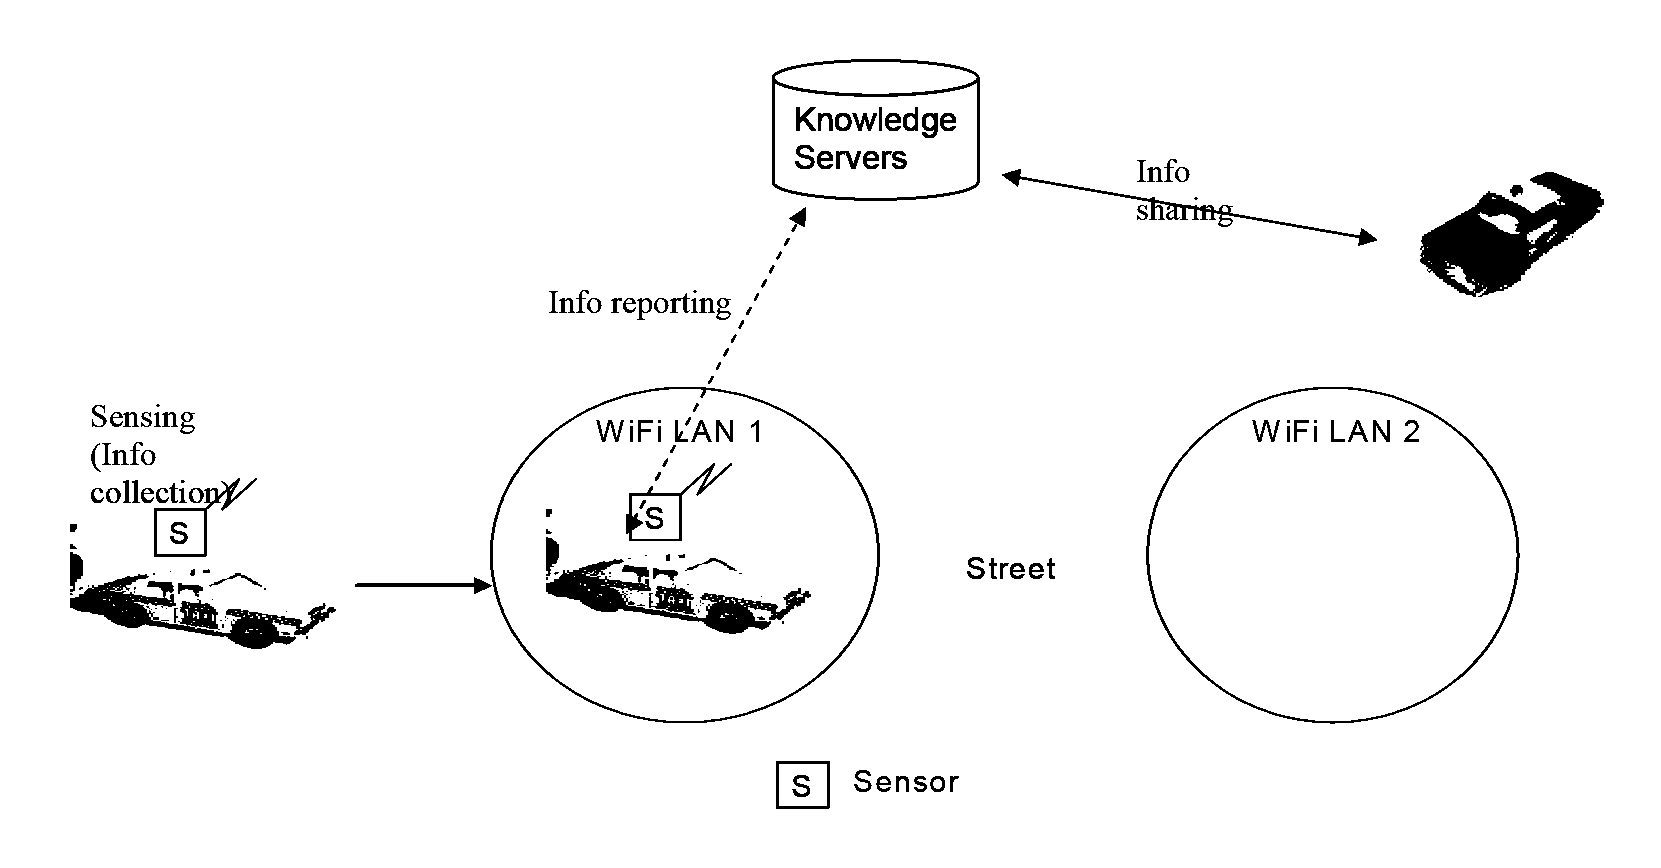 Environmental monitoring using mobile devices and network information server